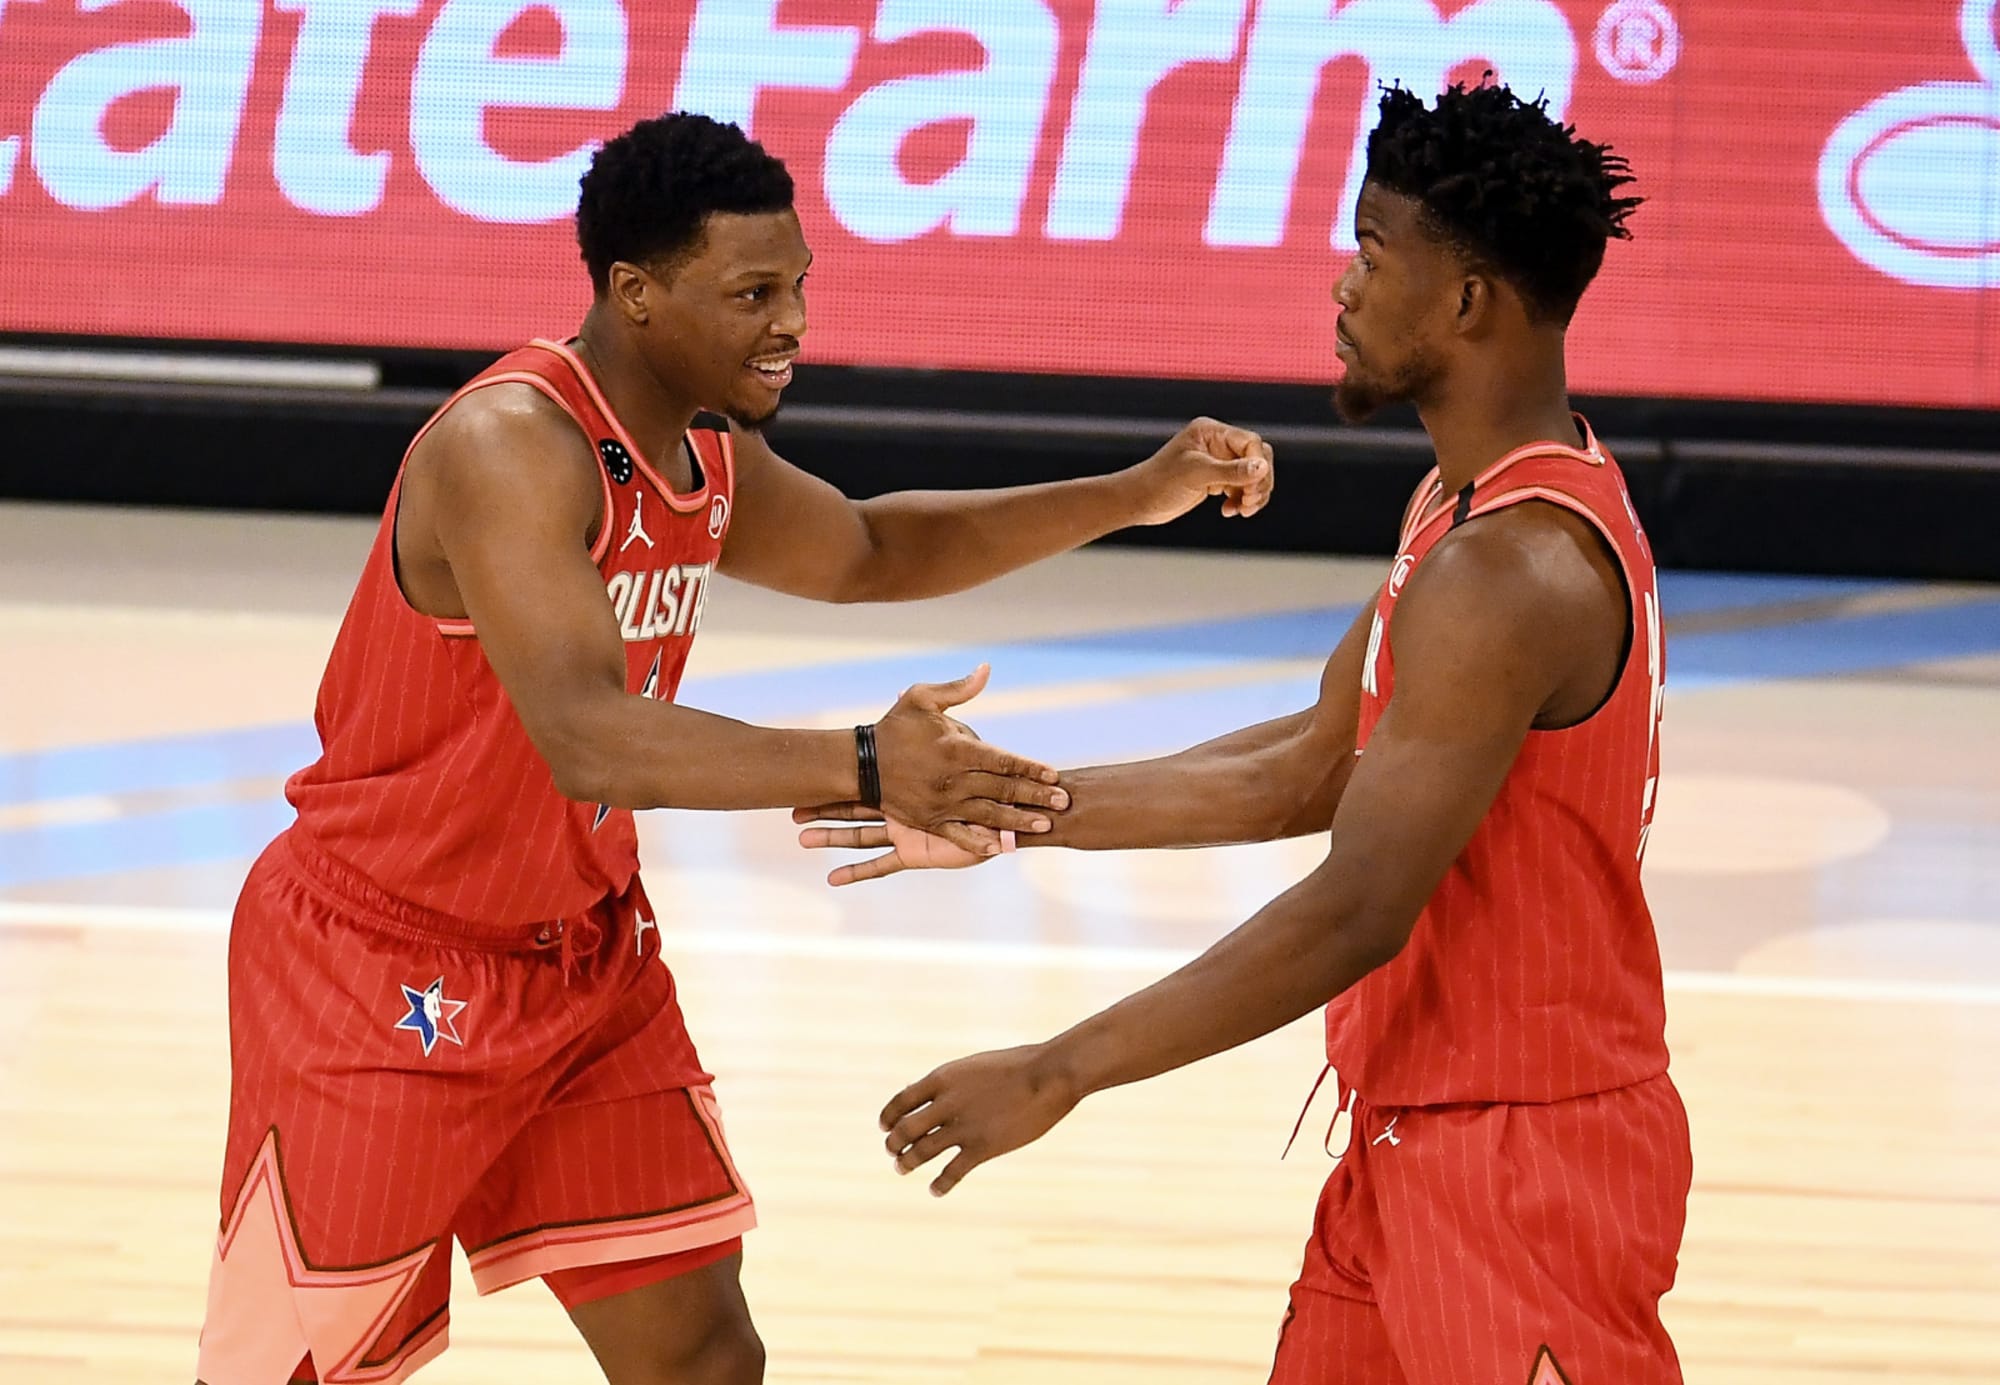 NBA All-Star 2019: Kyle Lowry named as NBA All-Star reserve